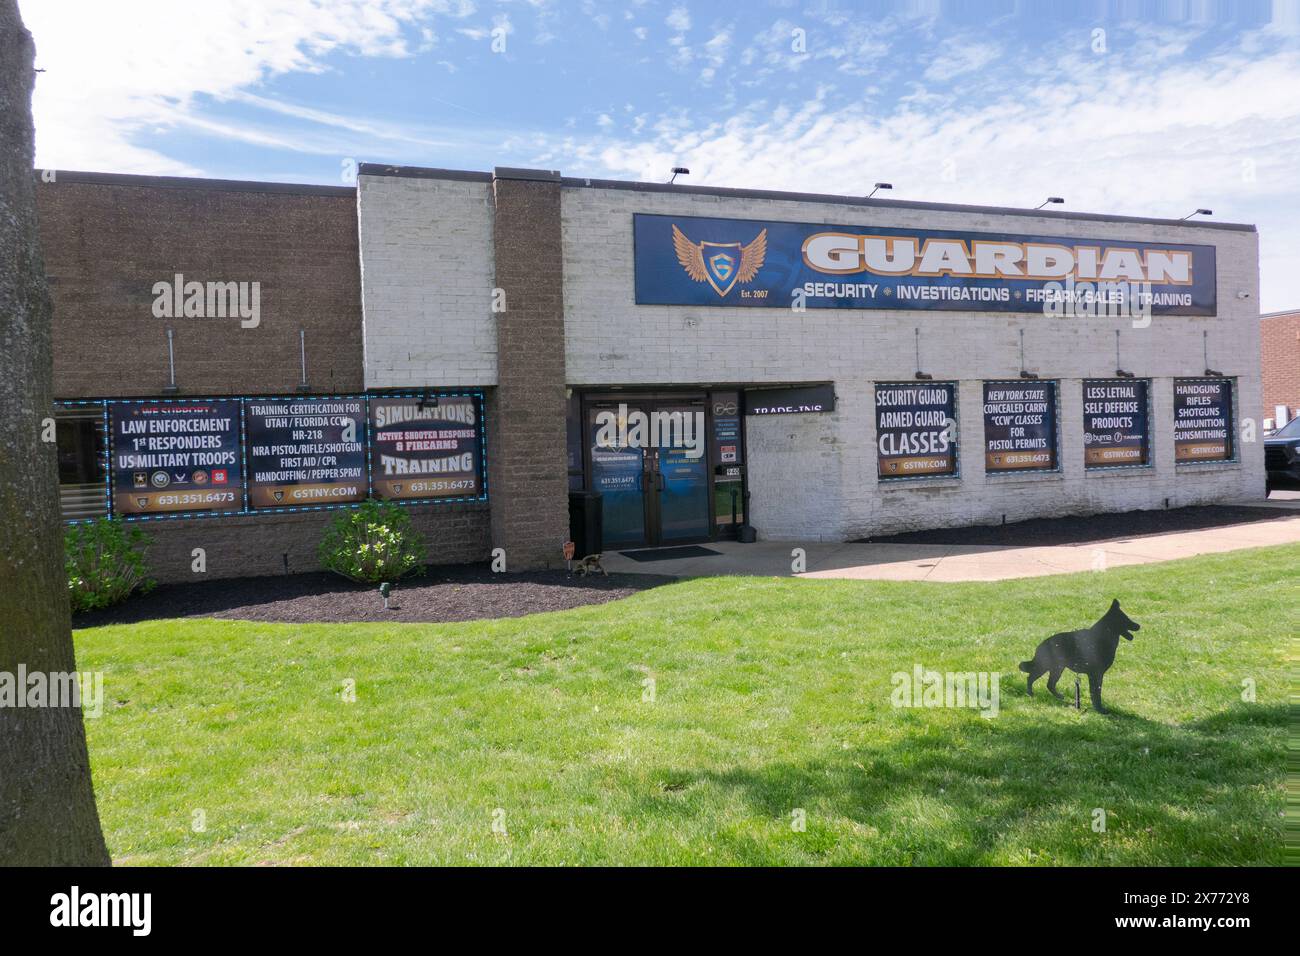 The exterior of Guardian Security Training who also offer firearms training, investigations and security. On Grand Blvd in Deer Park, Long Island, NY. Stock Photo